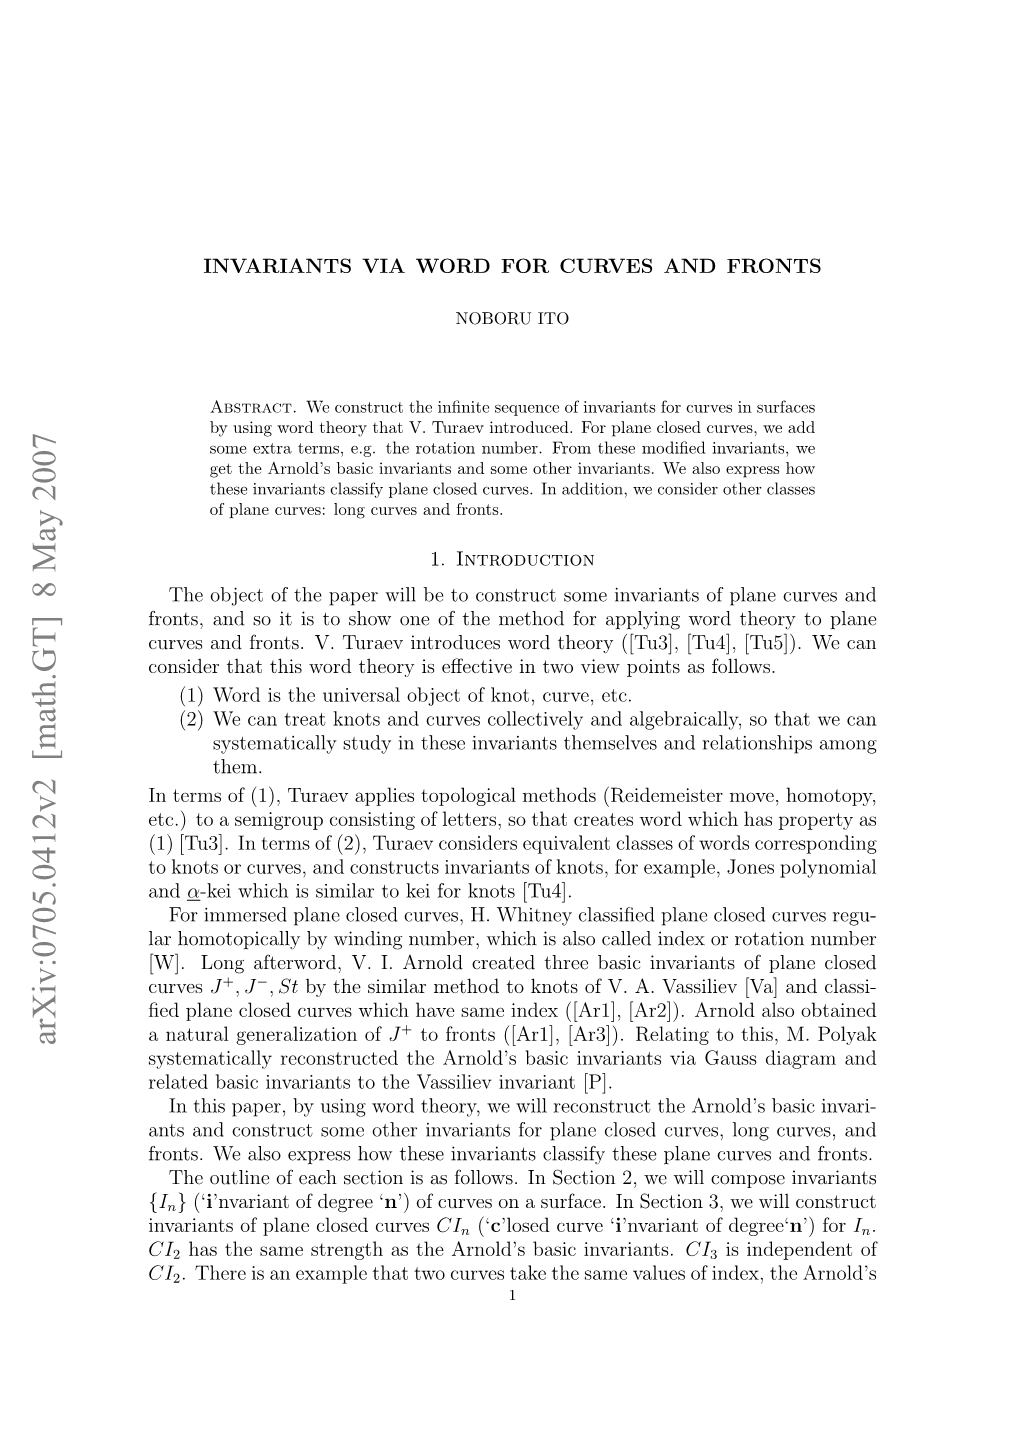 Invariants Via Word for Curves and Fronts